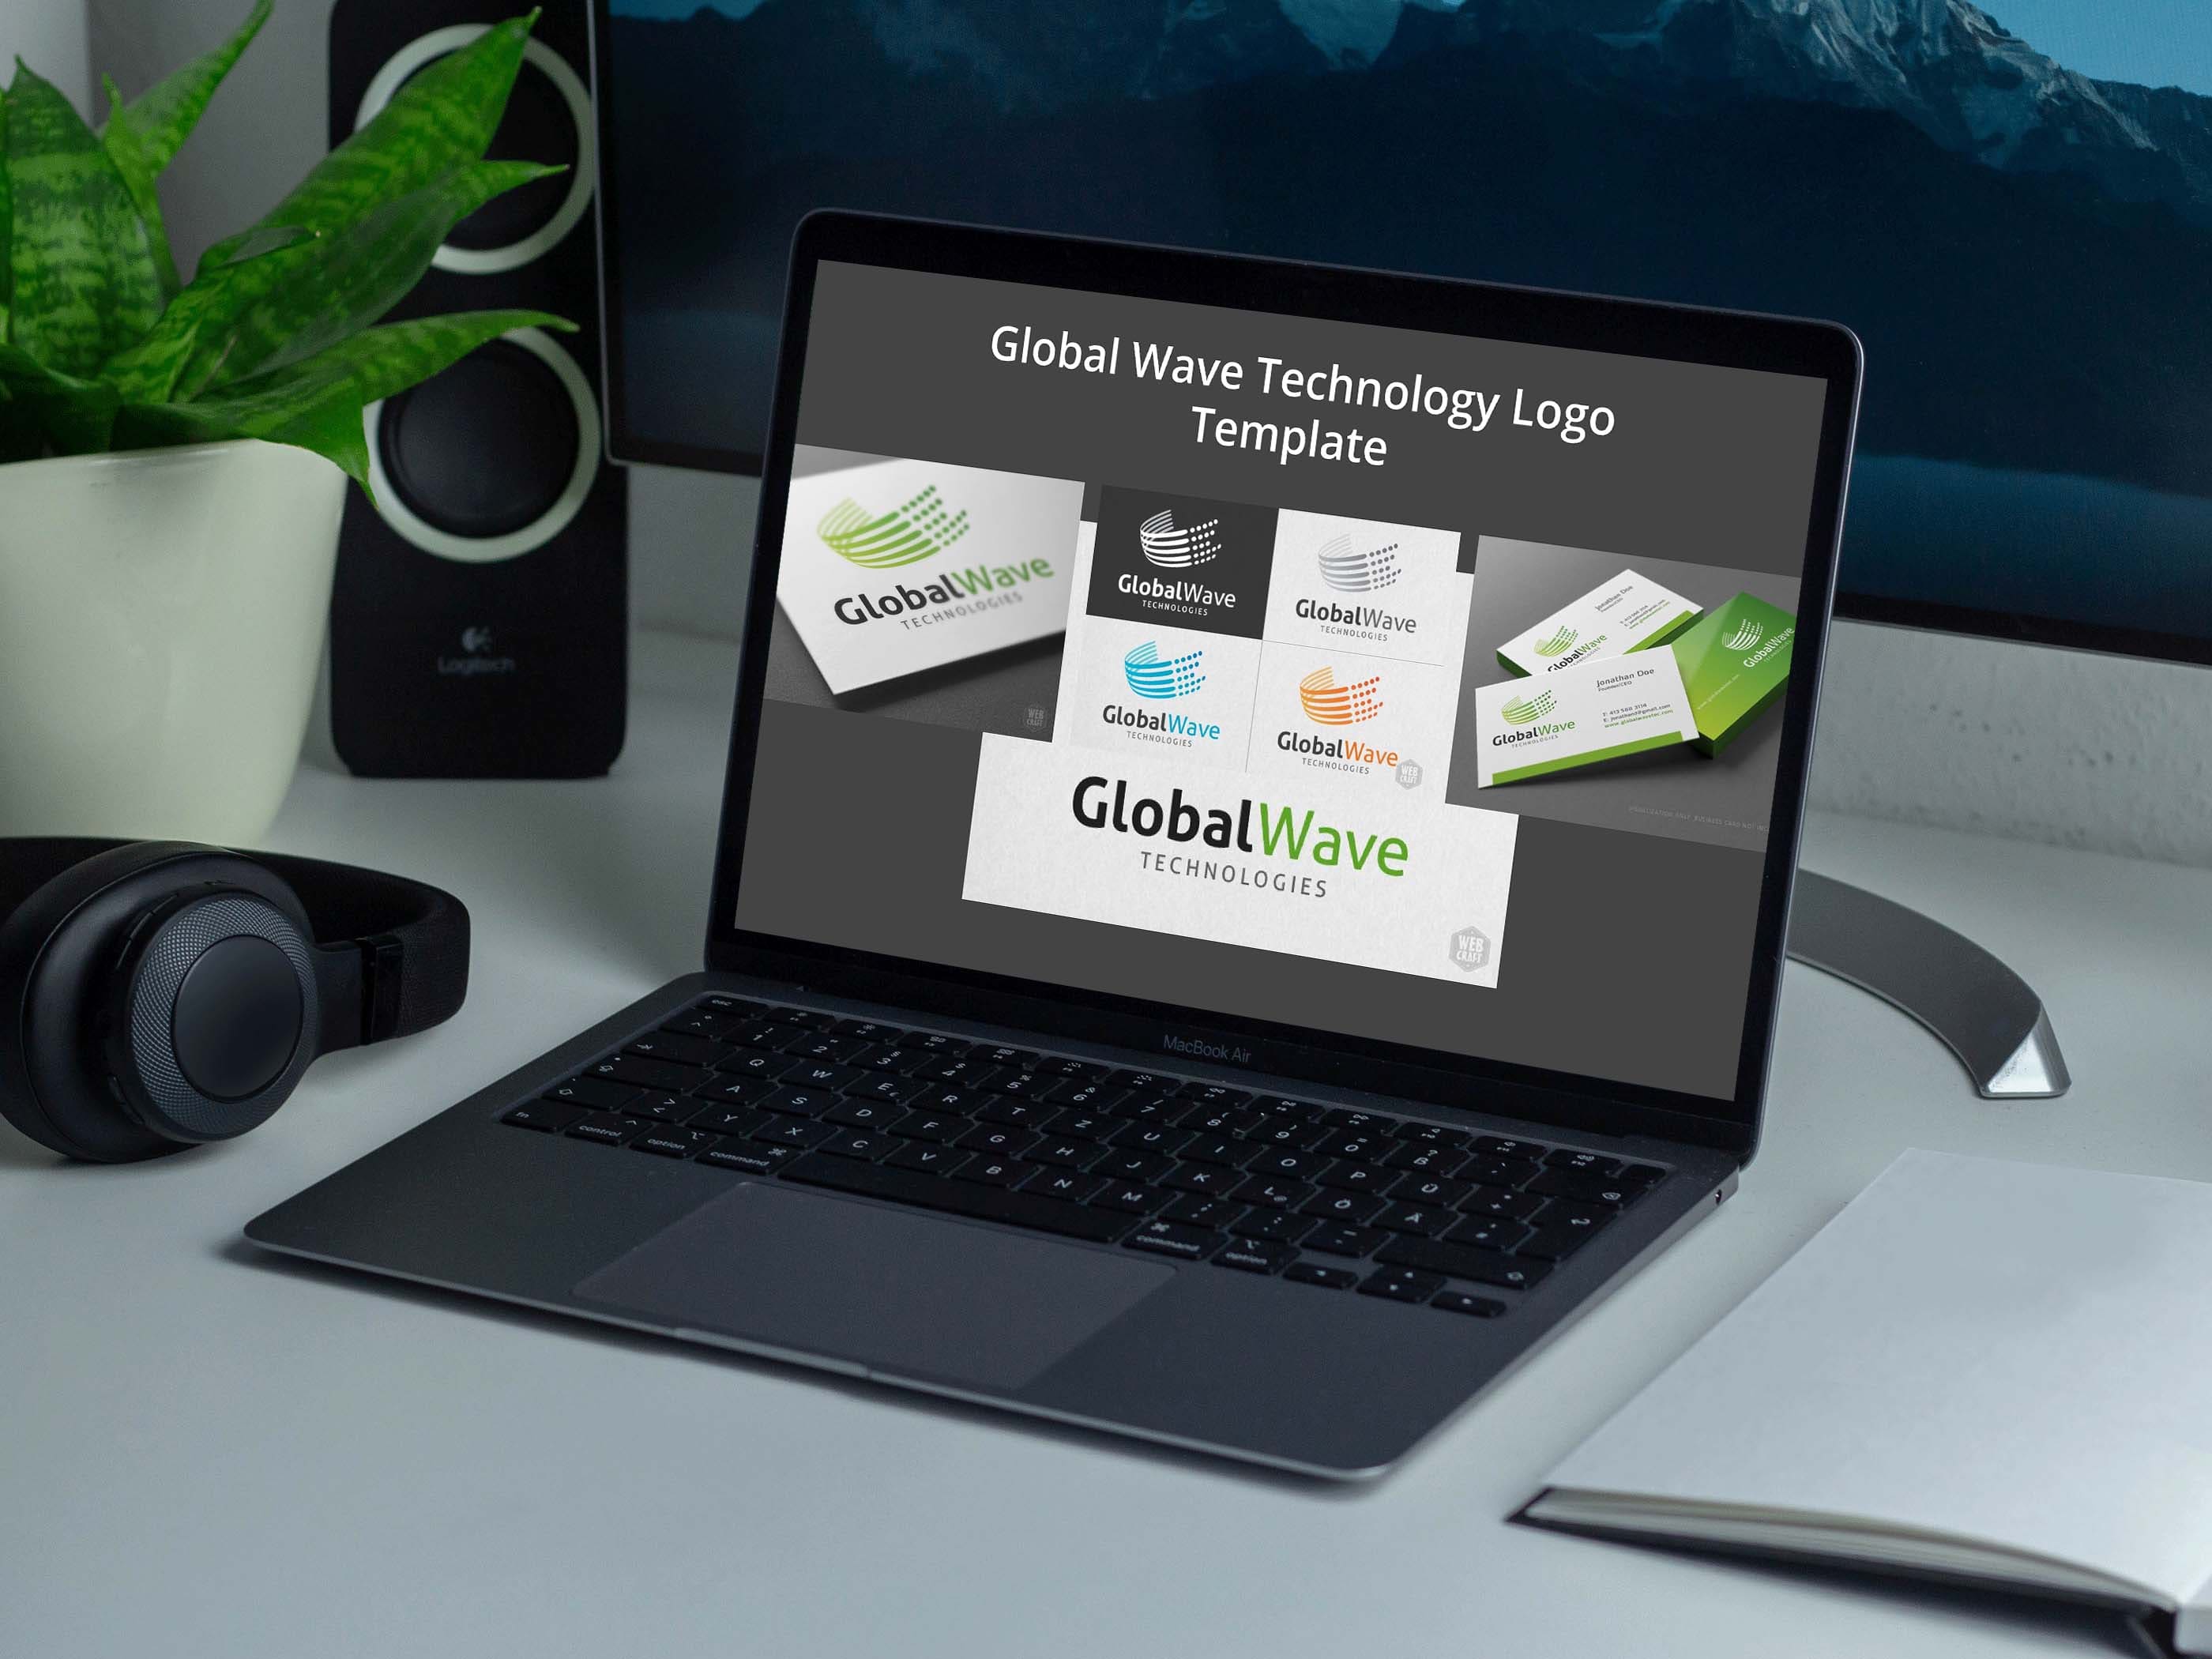 Global Wave Technology Logo Template - laptop preview.